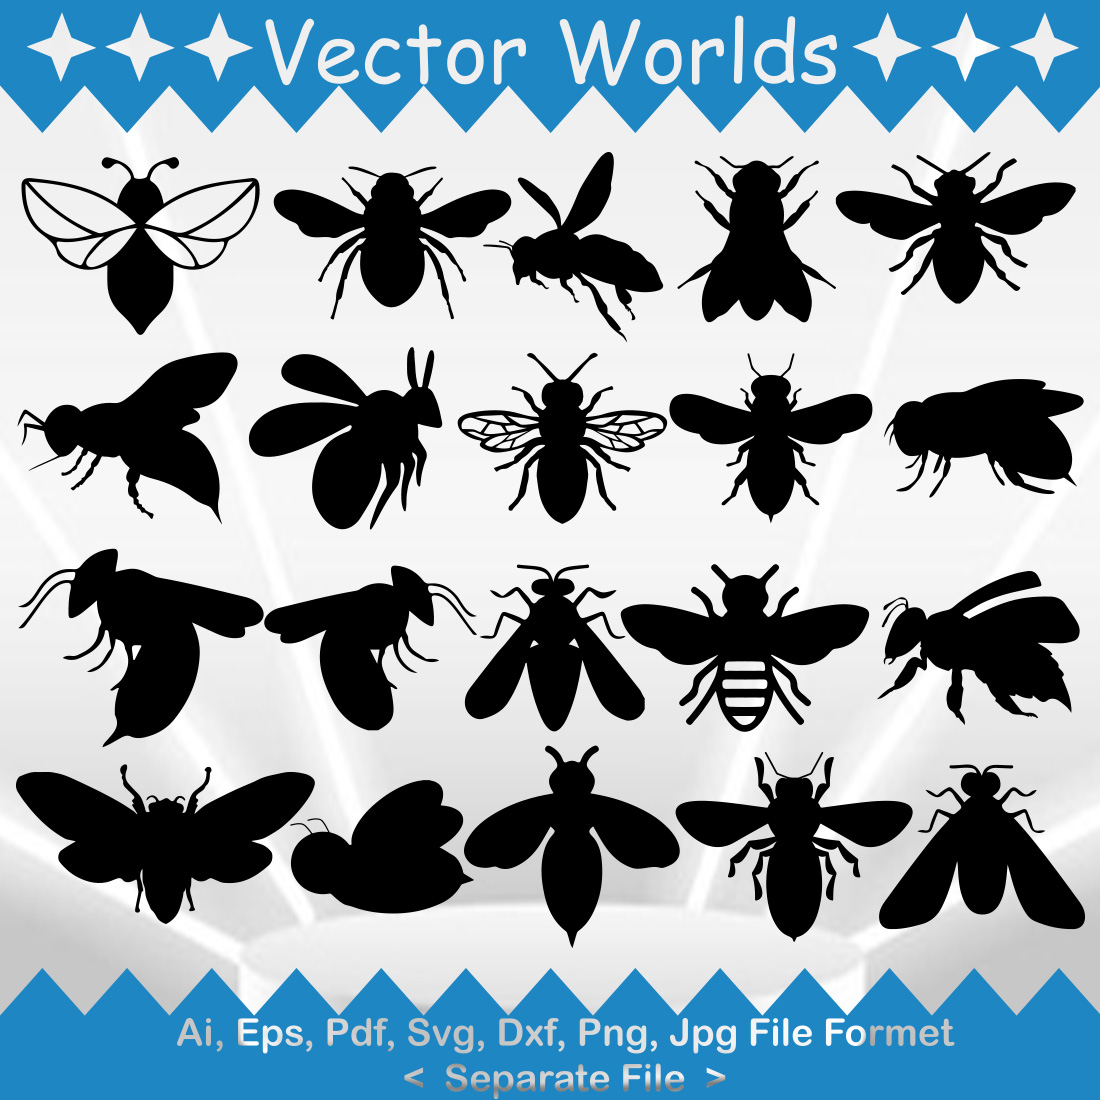 Pack of vector unique images of silhouettes of bees.